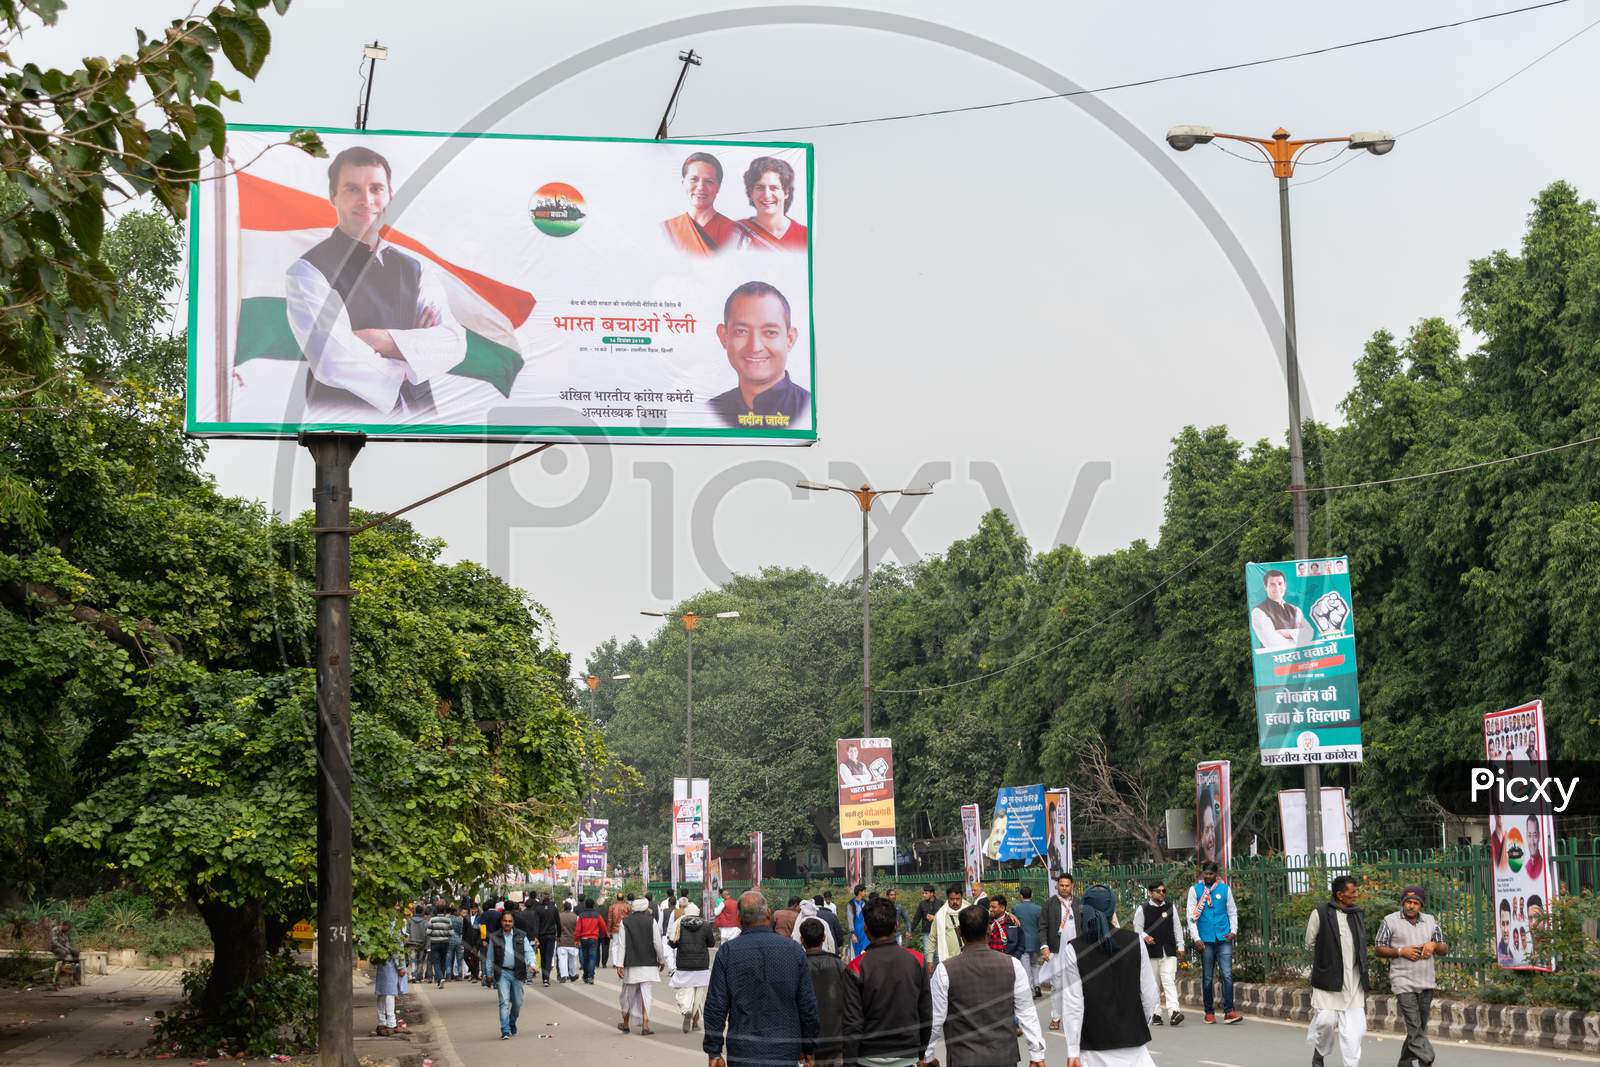 Rahul Gandhi photo in a Banner for 'Bharat Bachao' rally by Congress in Delhi to highlight Modi govt failures and people participating in rally